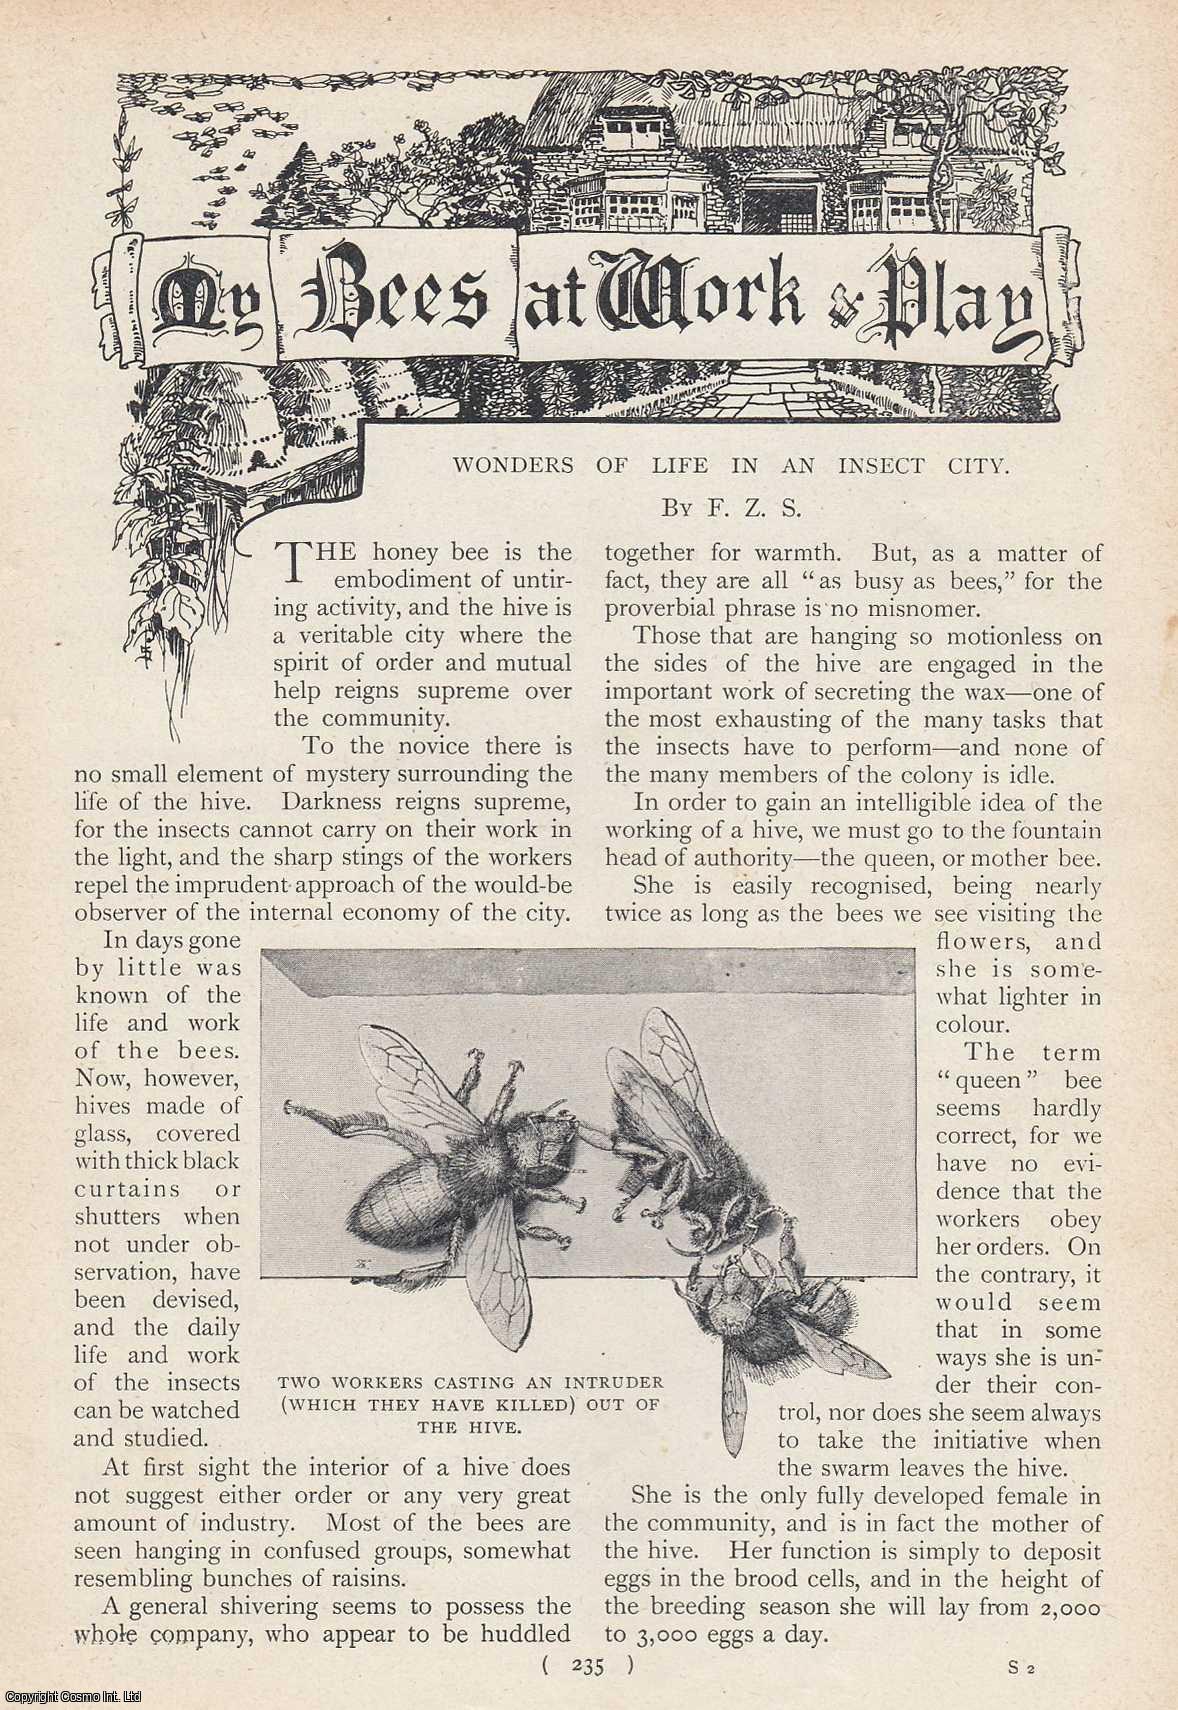 F.Z.S. - Honey Bee, My Bees at Work and Play : Wonders of Life in an Insect City. An uncommon original article from the Harmsworth London Magazine, 1902.